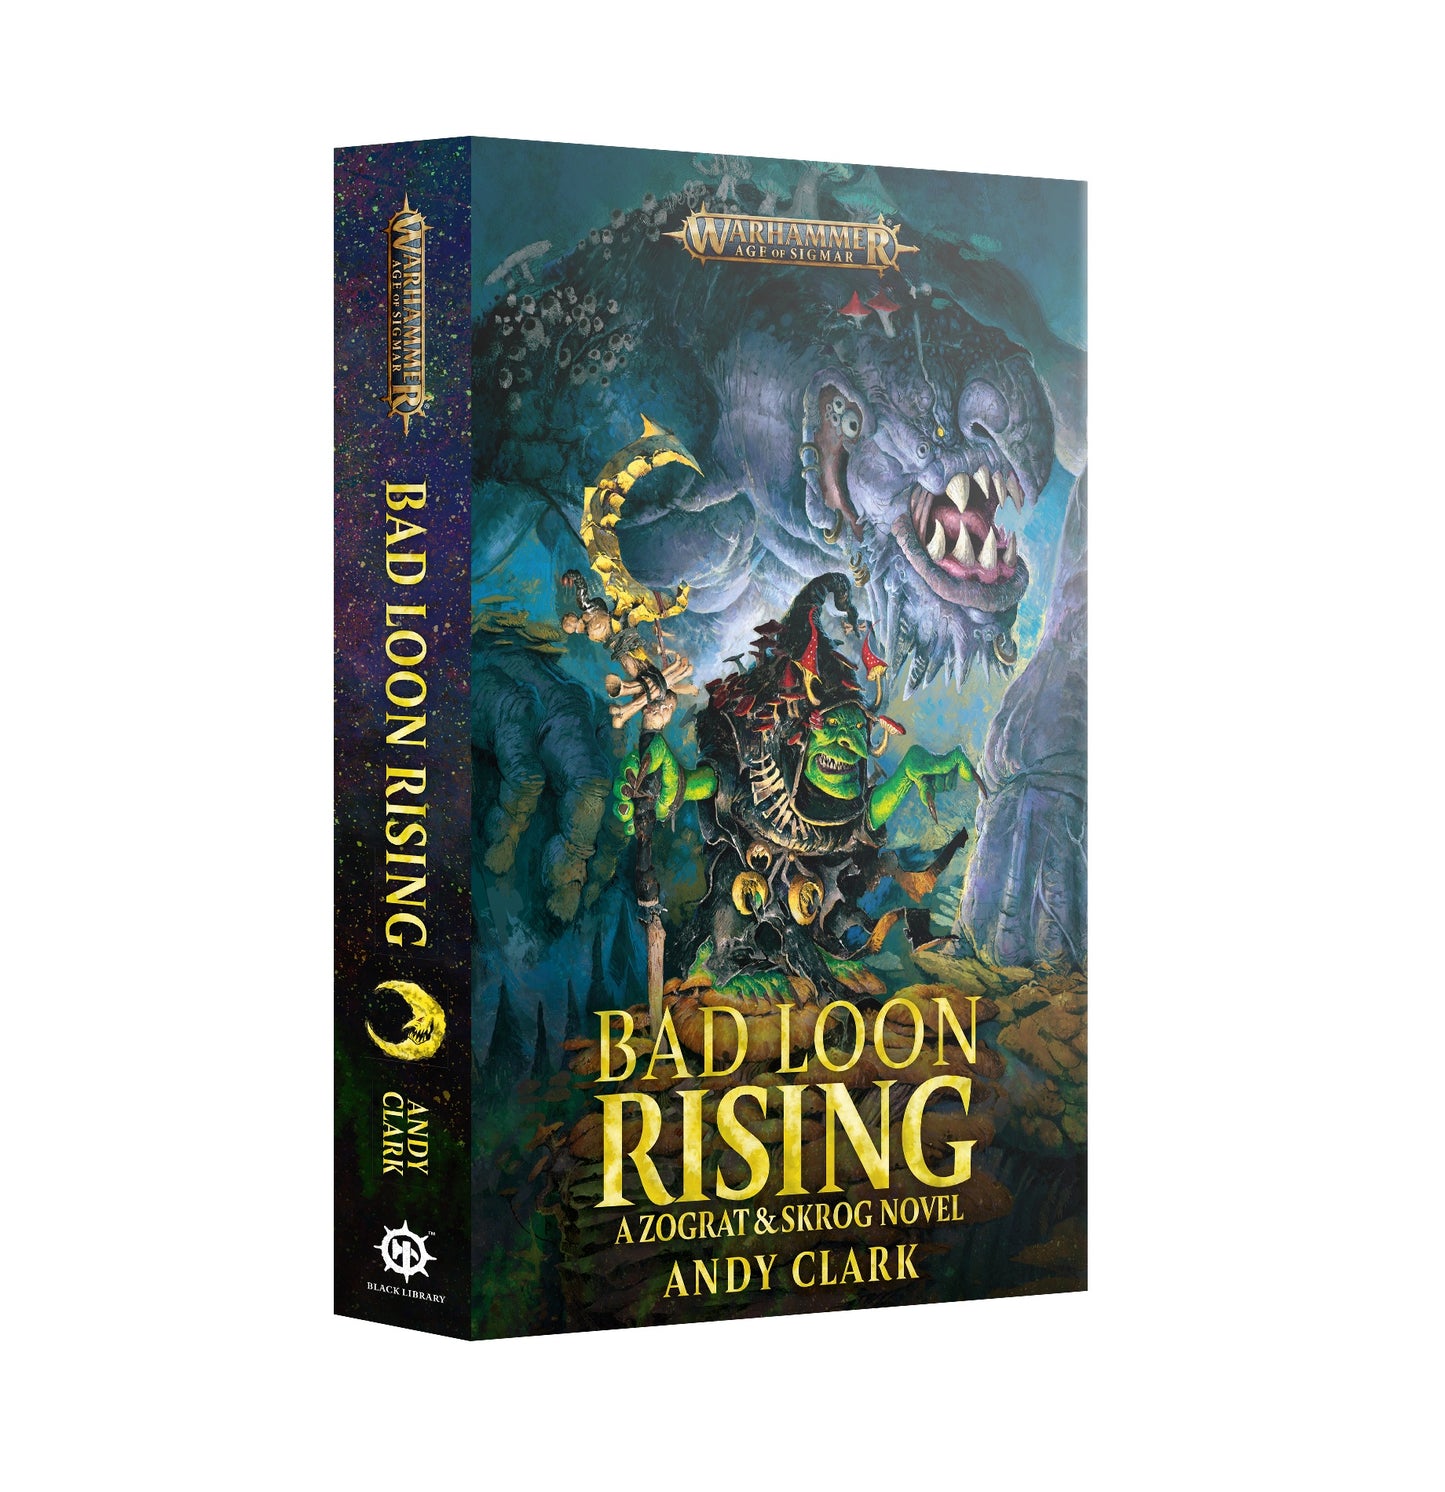 AGE OF SIGMAR BAD LOON RISING BY ANDY CLARK